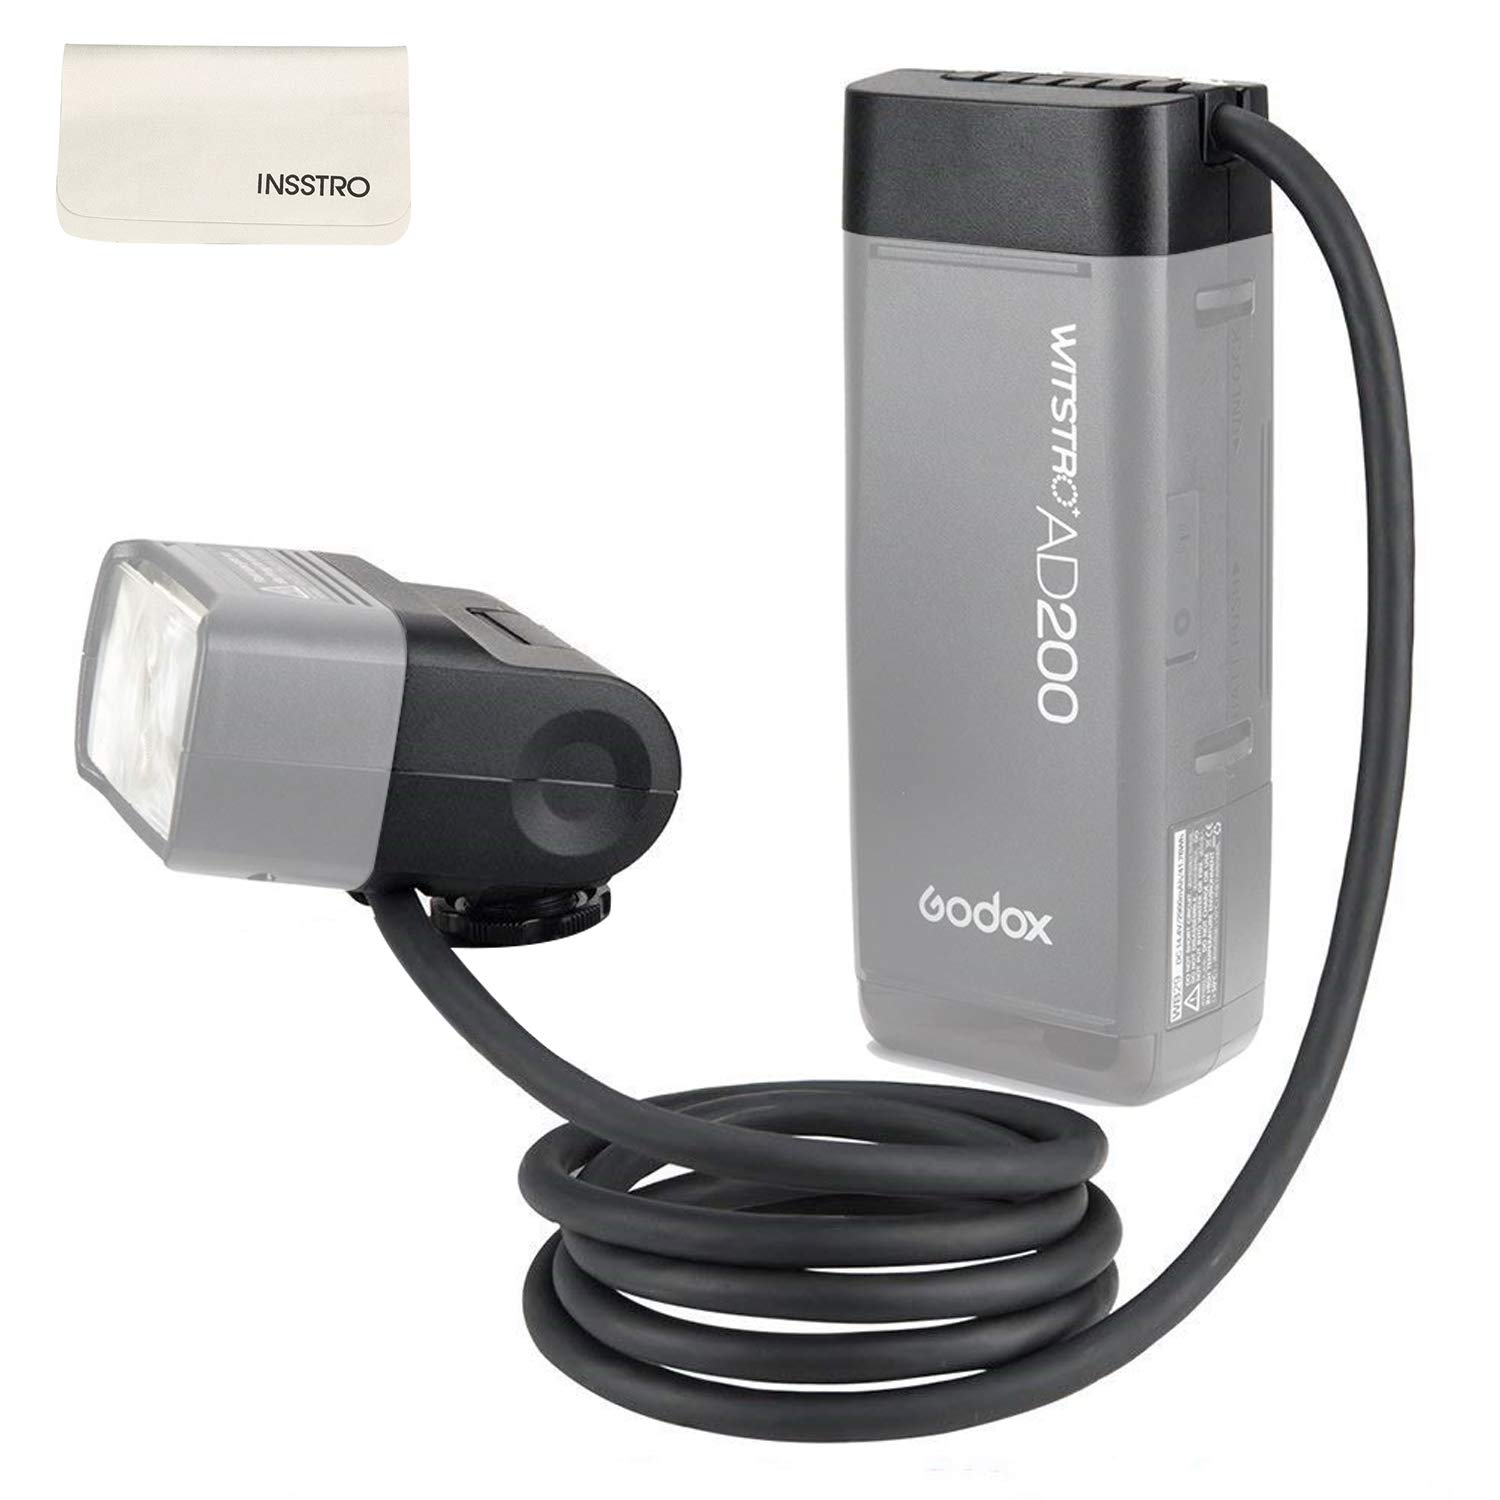 Godox 200W Extension Flash Head EC200 for Godox AD200/ AD200Pro Pocket Flash, 2M Extend Power Cable, Works with AD200/ AD200Pro Bare Bulbs Head and...